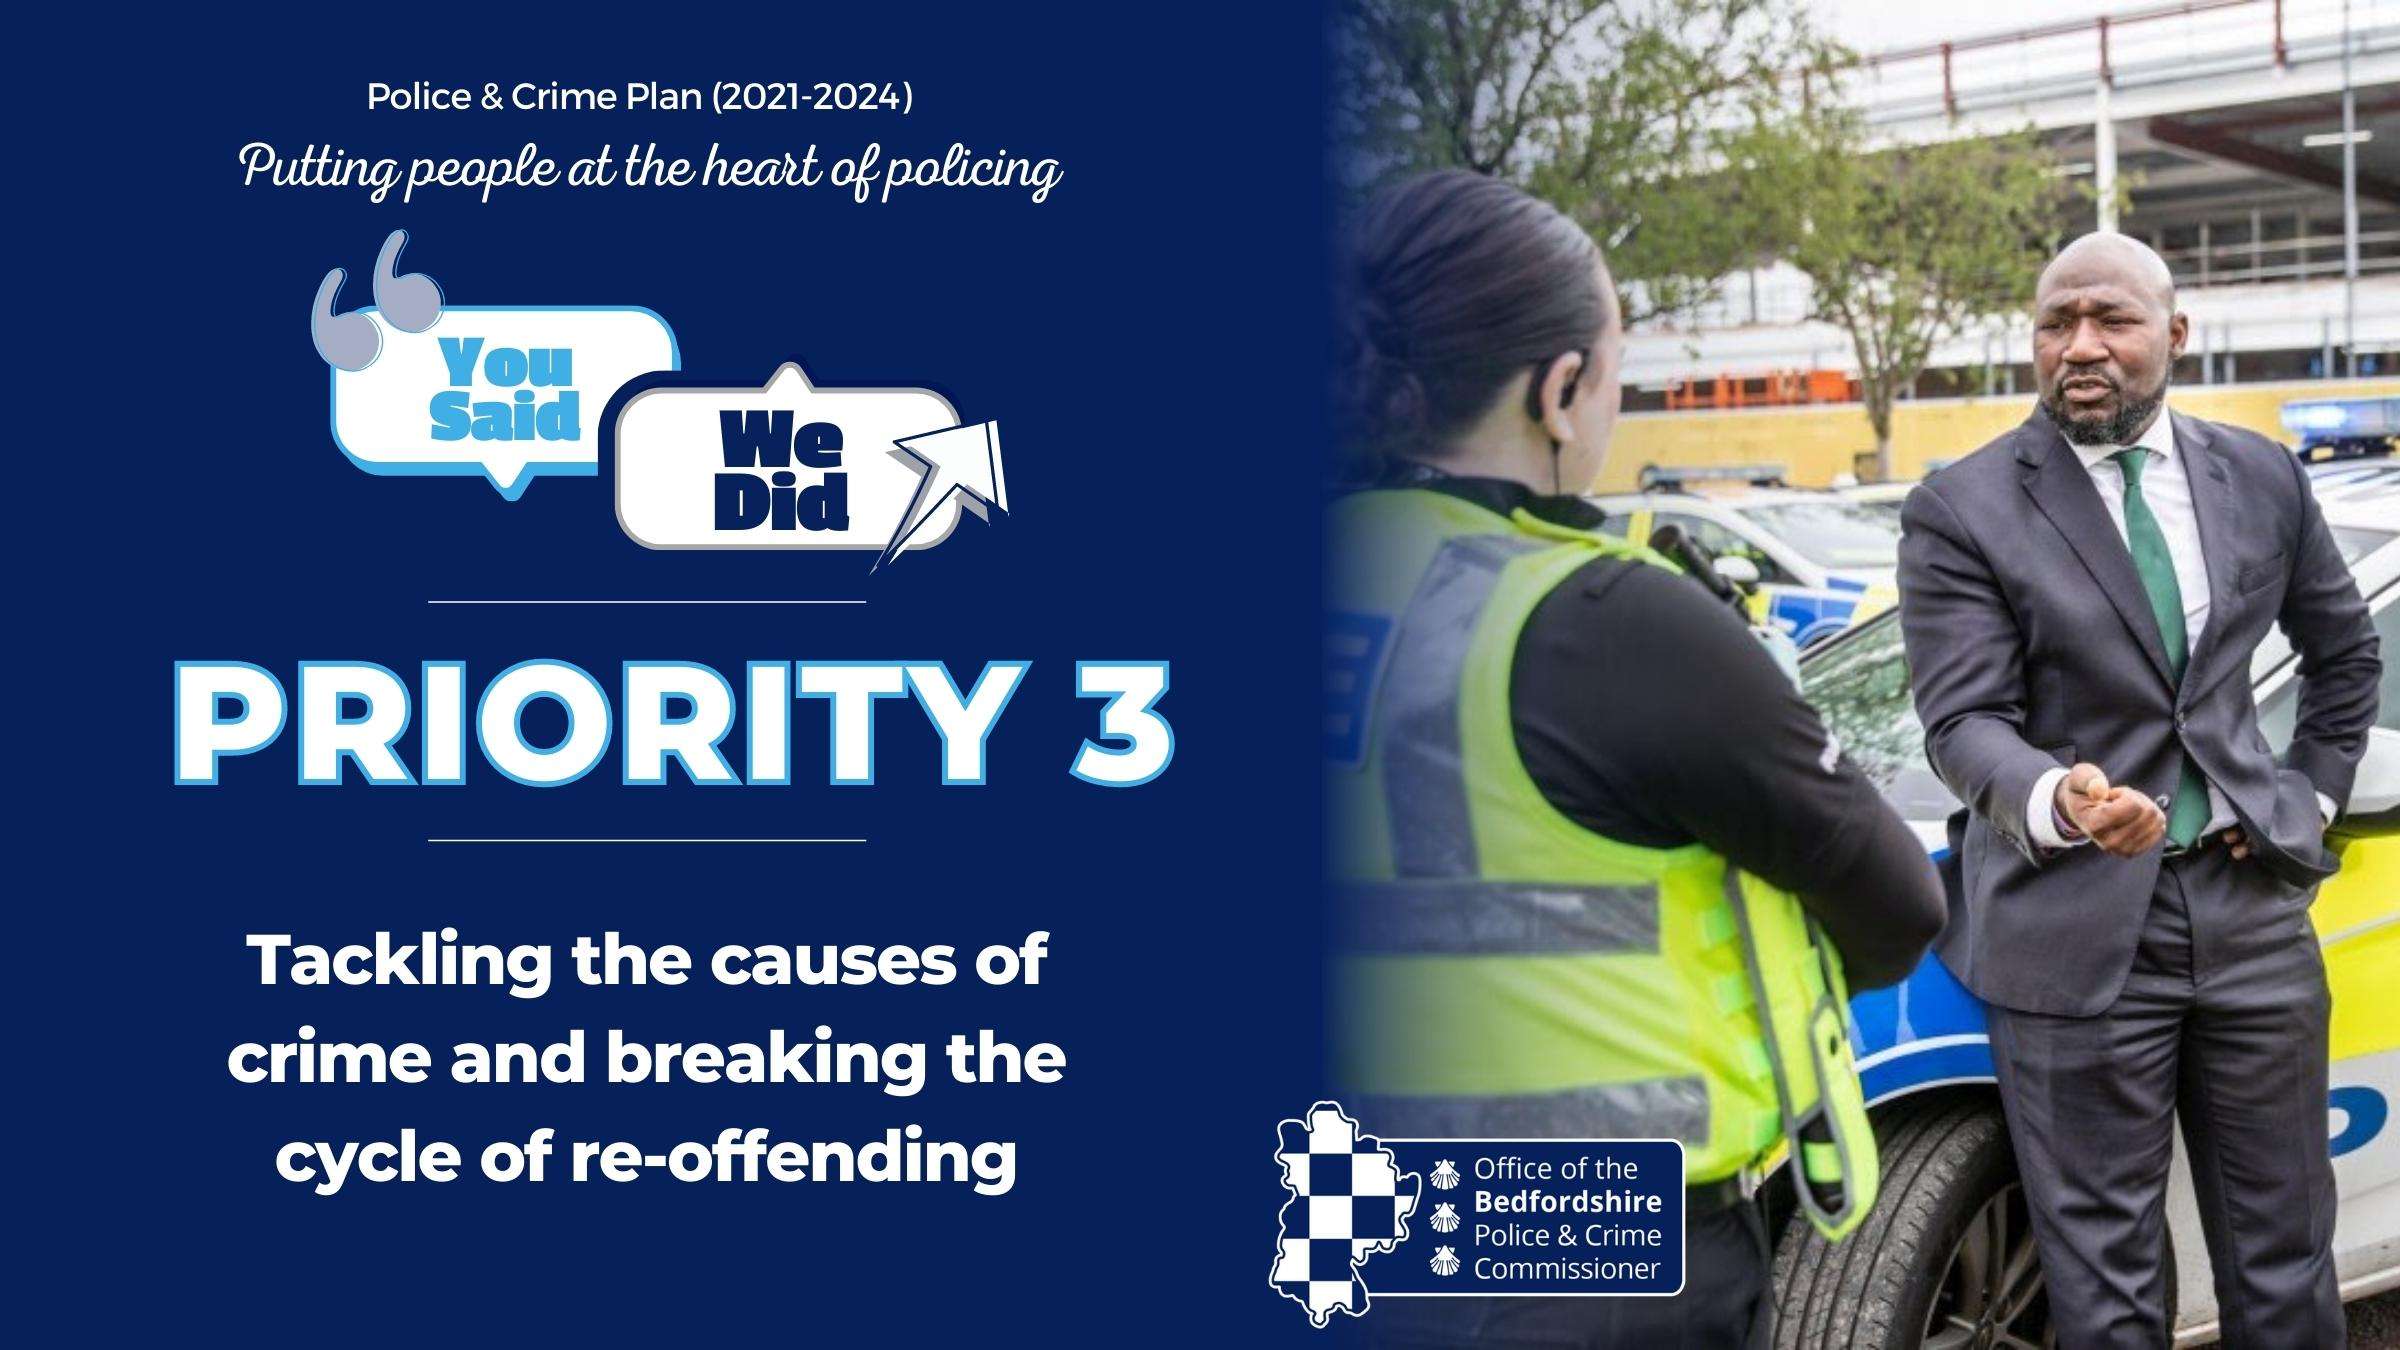 Priority 3, Tackling the causes of crime and breaking the cycle of re-offending